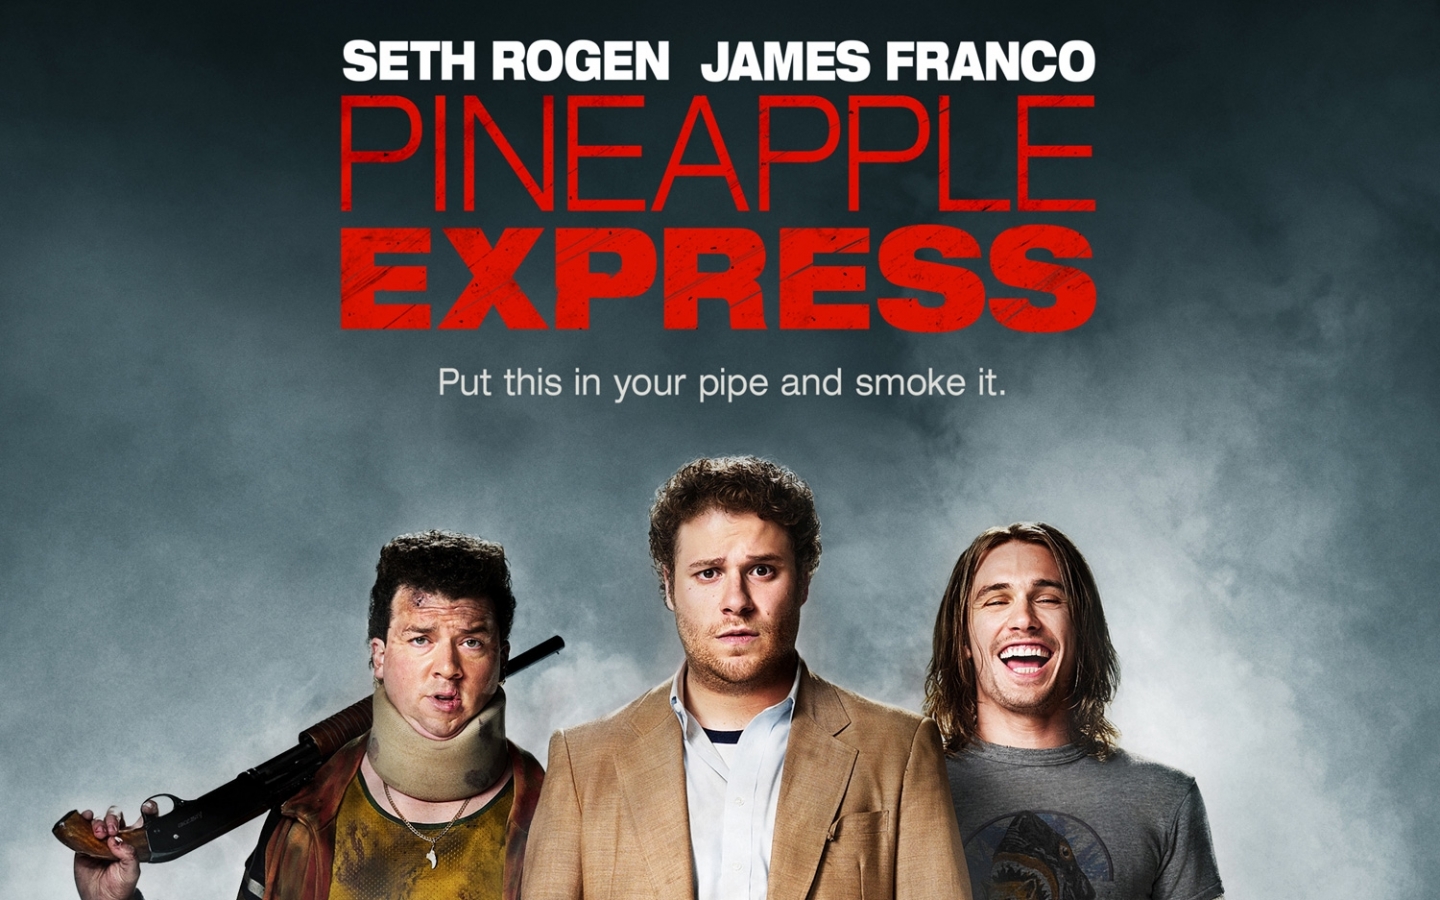 pineapple express james franco movie posters seth rogen 1500x2229